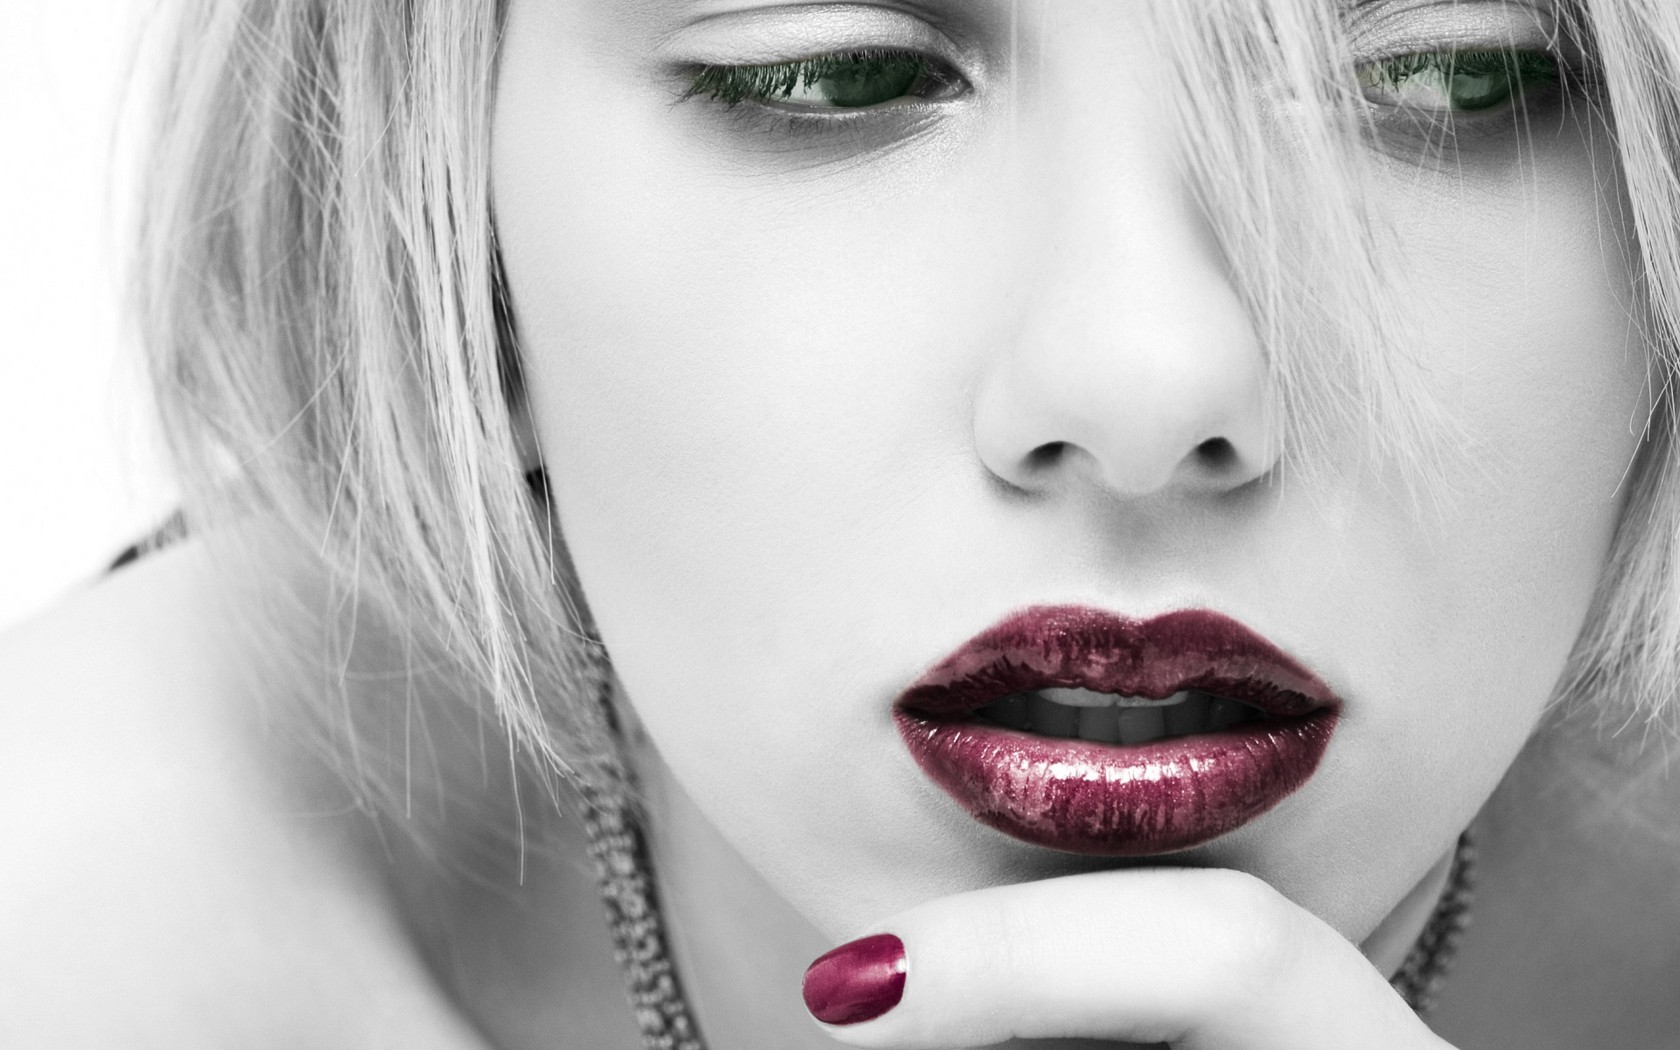 People 1680x1050 Scarlett Johansson lipstick actress selective coloring painted nails portrait makeup celebrity women face green eyes looking away red lipstick